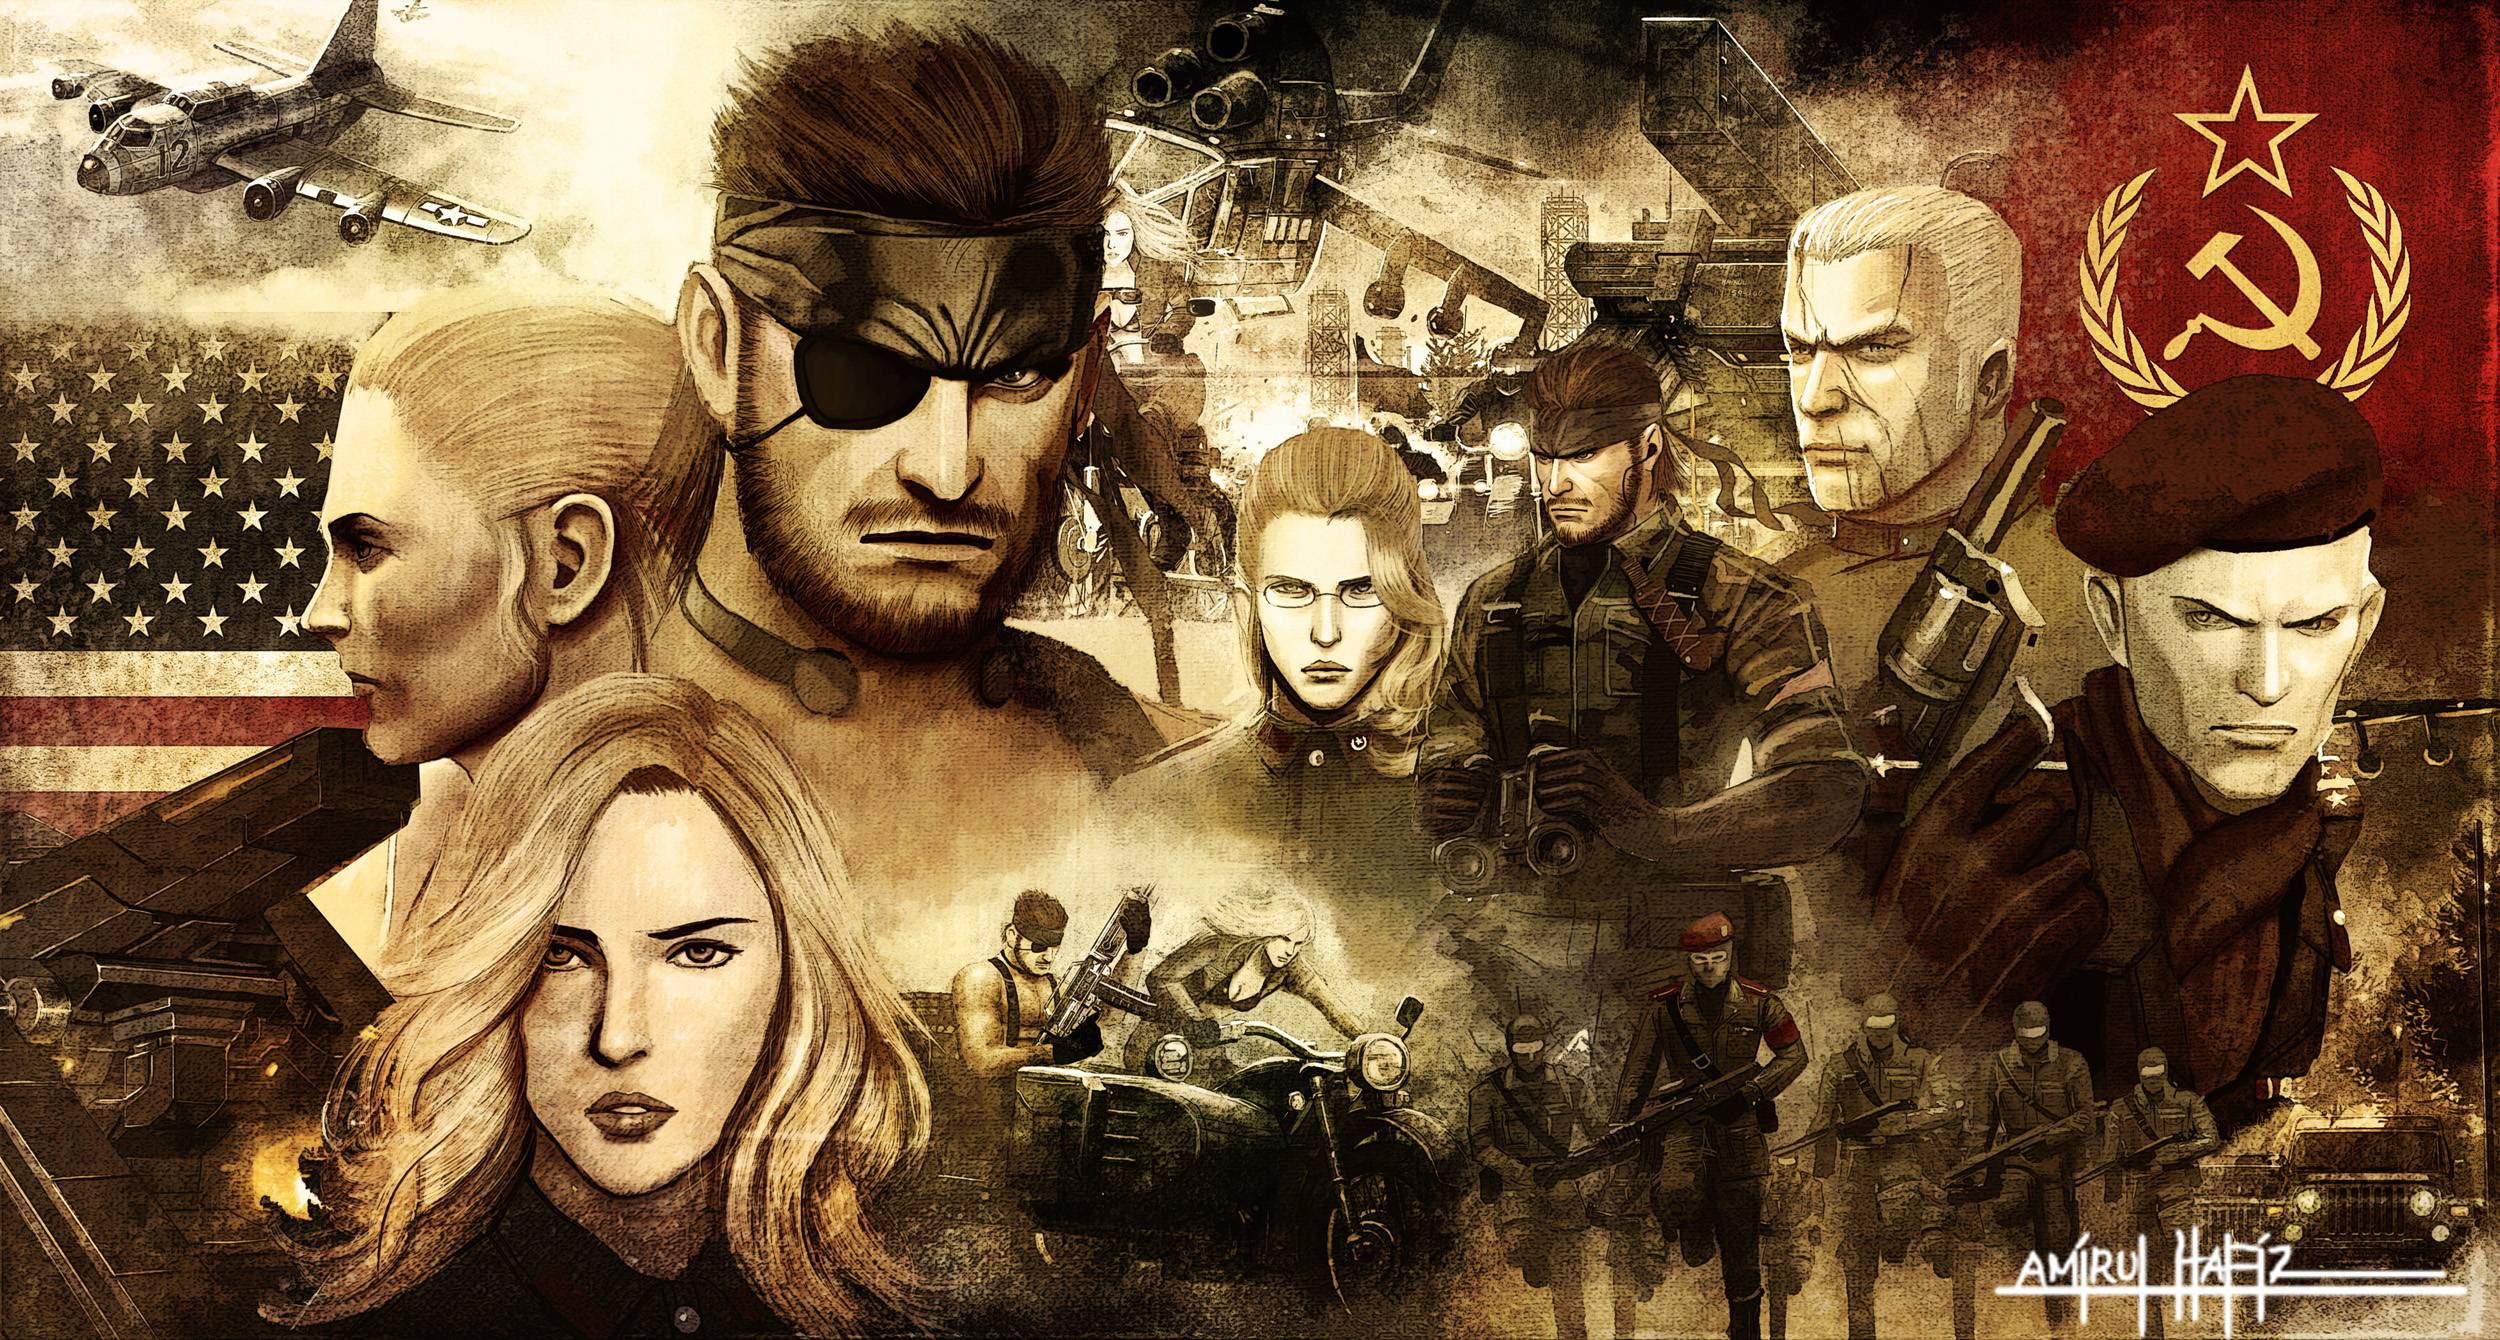 METAL GEAR SOLID 3 SNAKE EATER POSTER